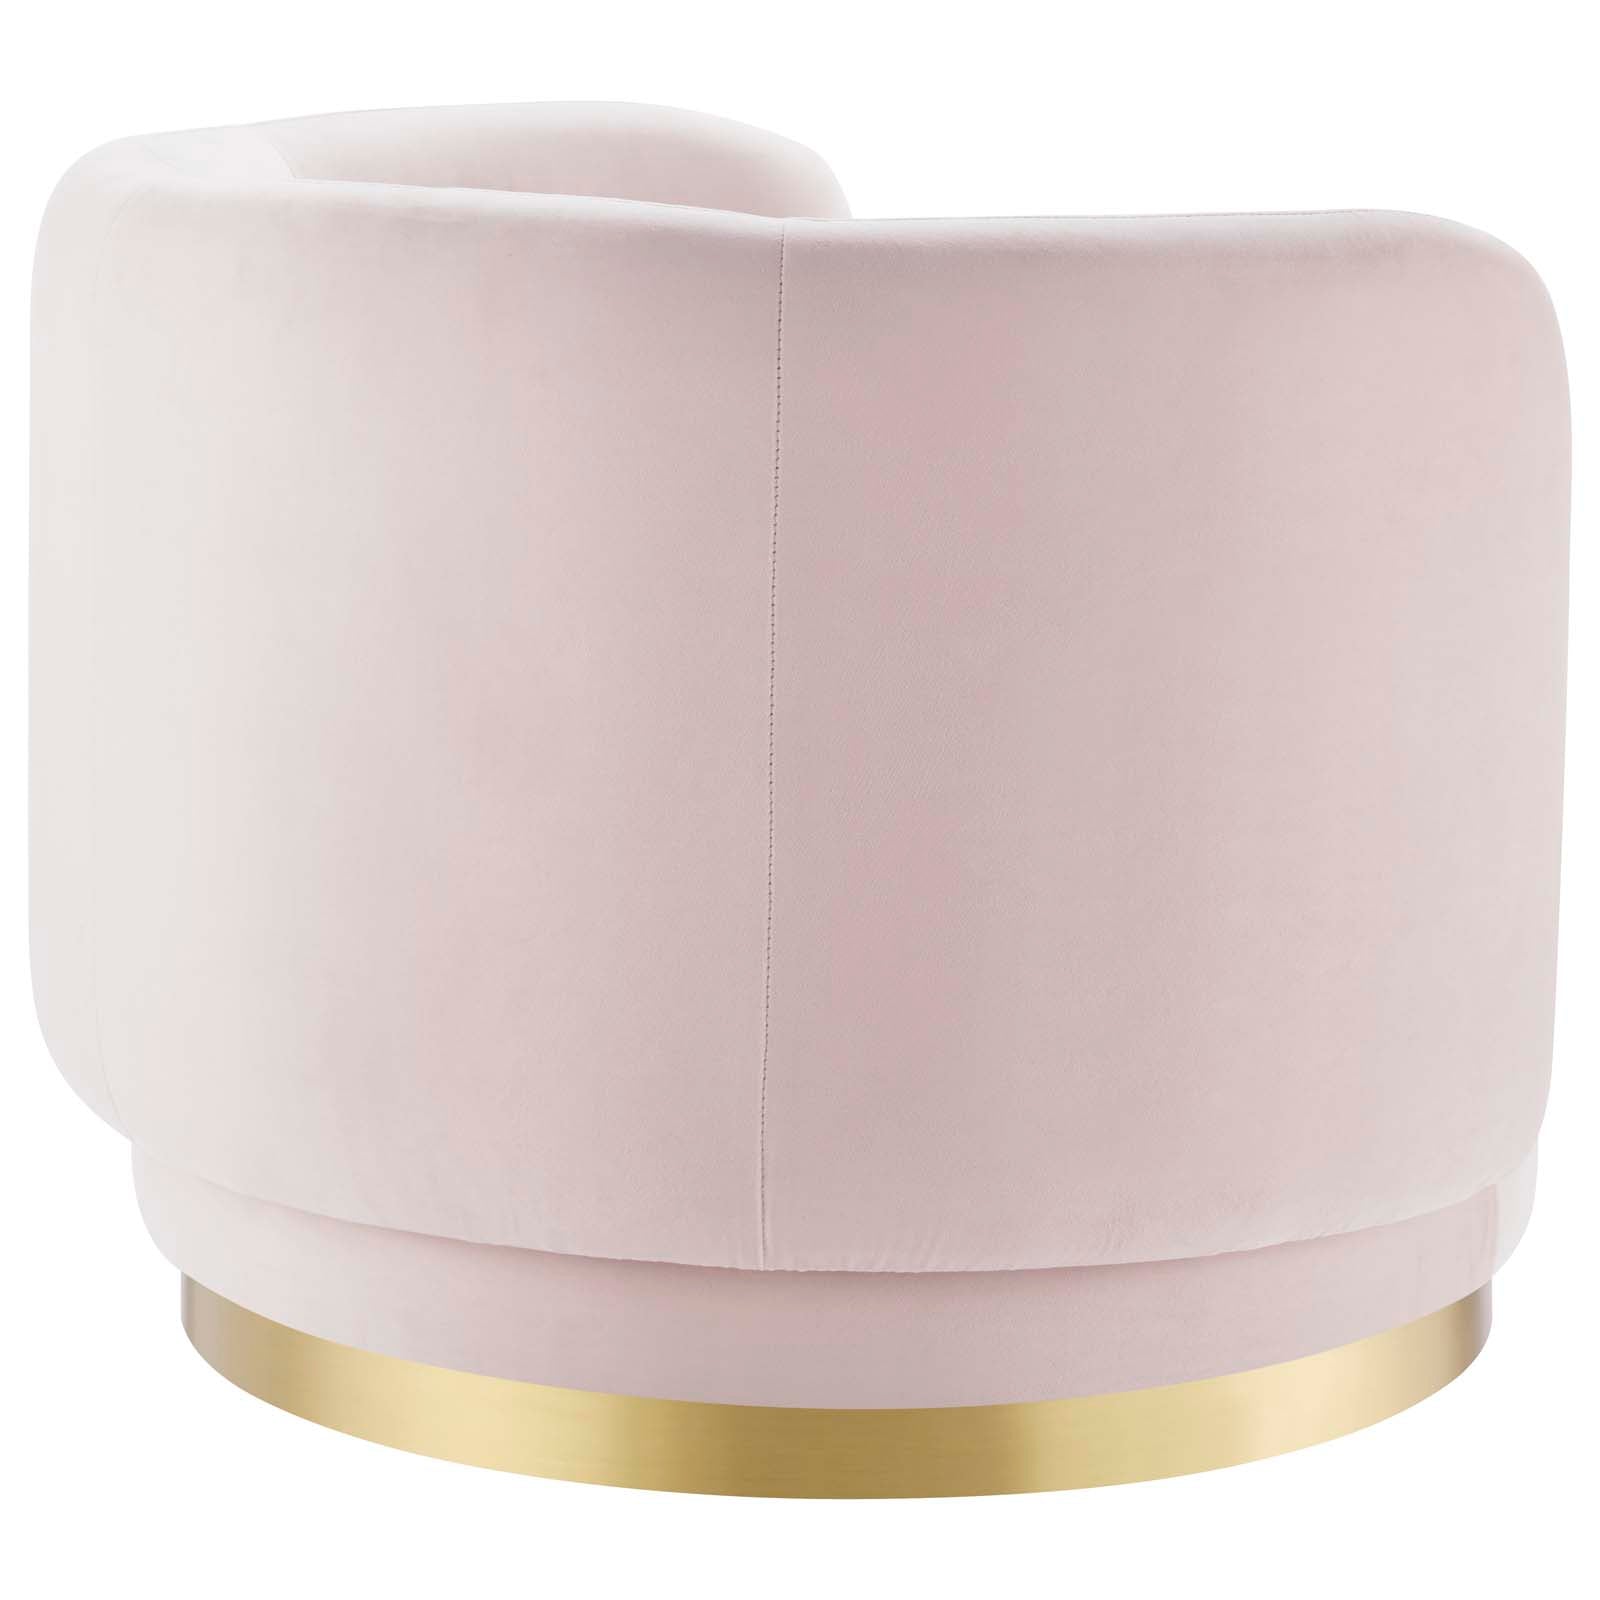 Modway Accent Chairs - Relish Performance Velvet Performance Velvet Swivel Chair Gold Pink